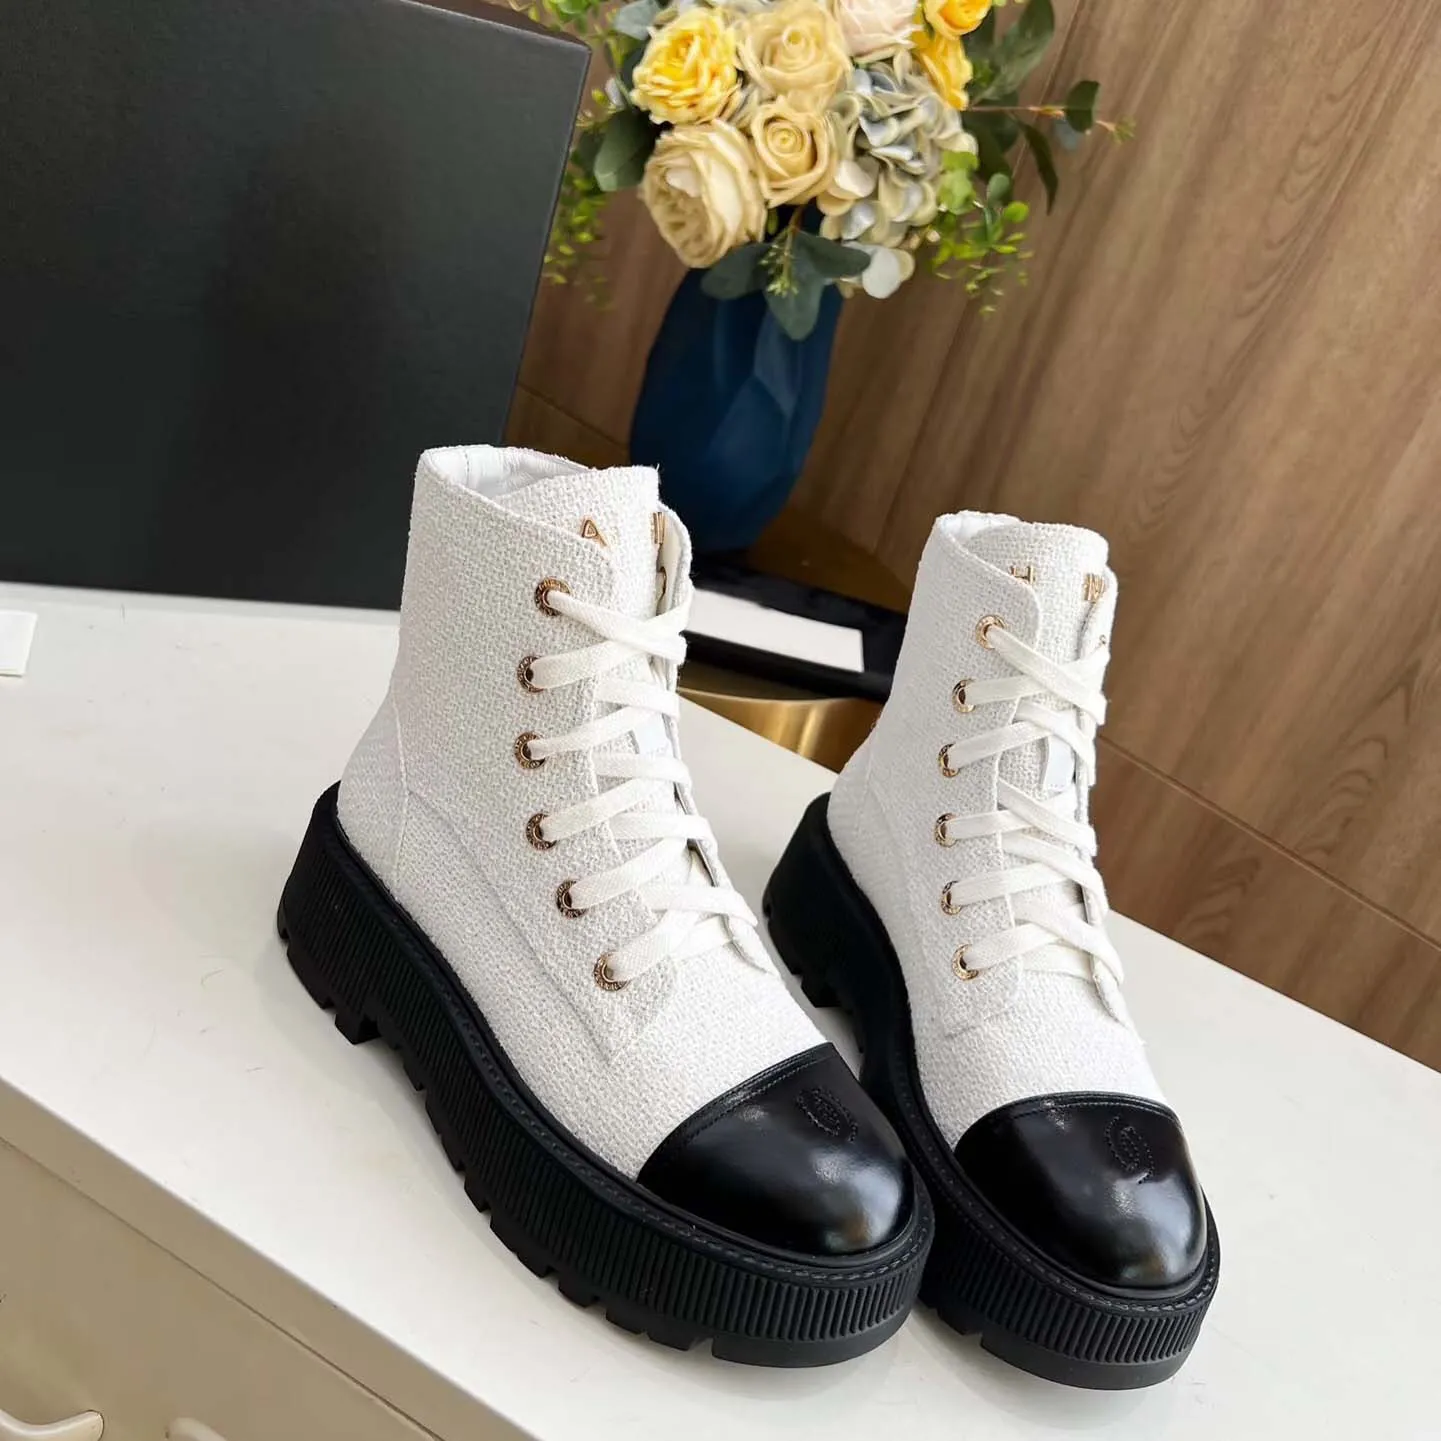 Designer Boots Paris Luxury Brand Boot Genuine Leather Ankle Booties Woman Short Boot Sneakers Trainers Slipper Sandals by 1978 S508 02